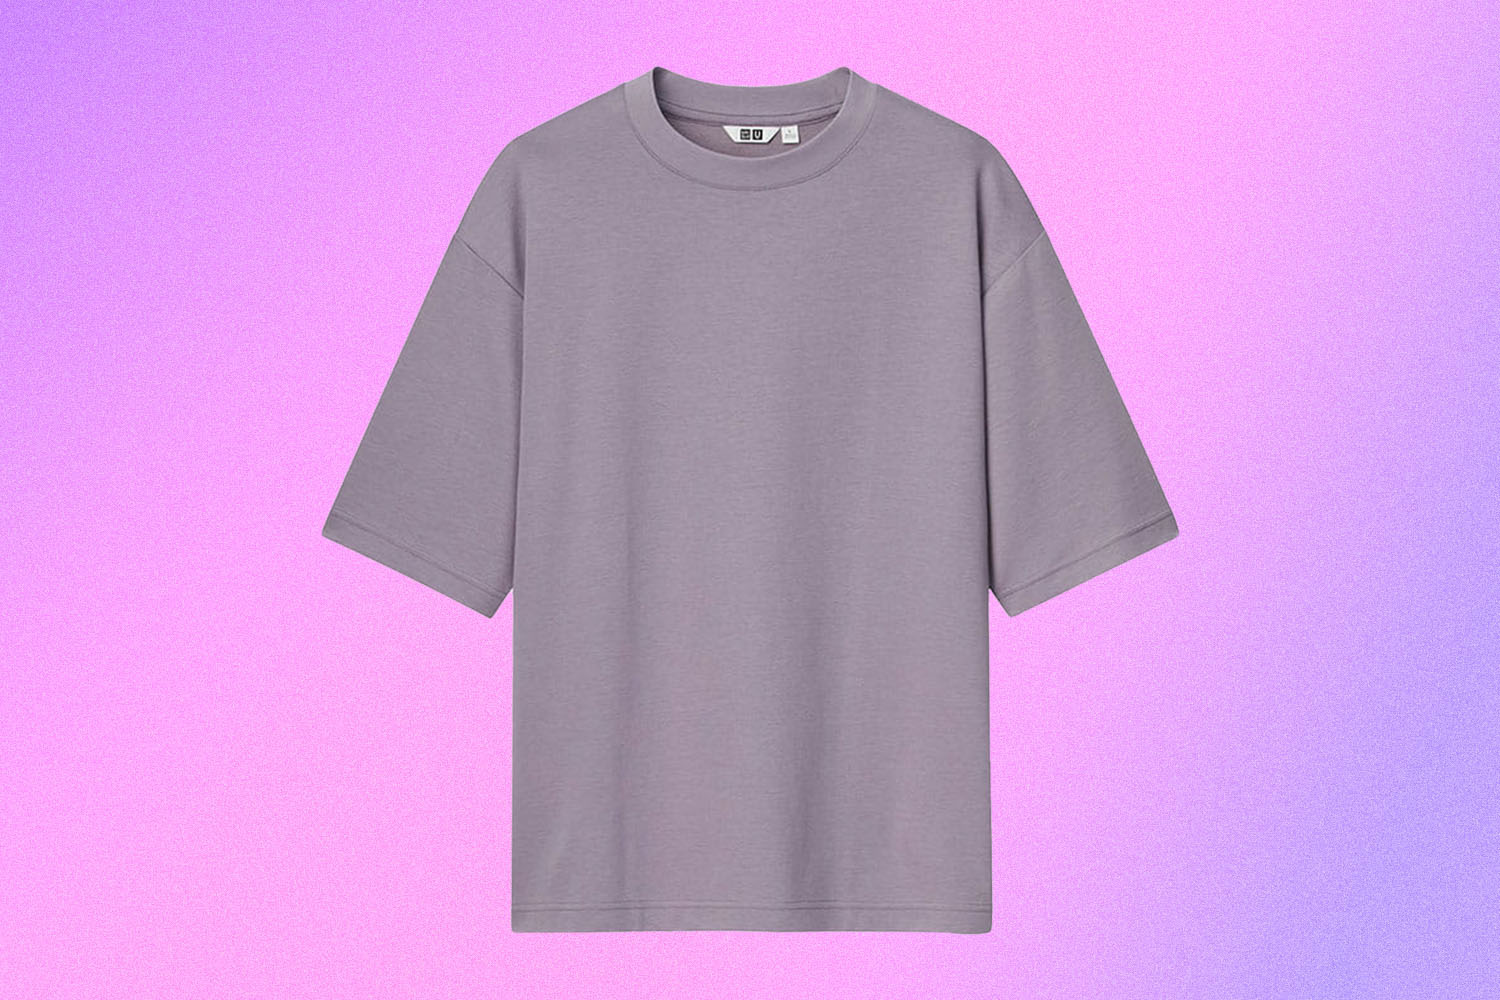 A lavender t-shirt on a purple background